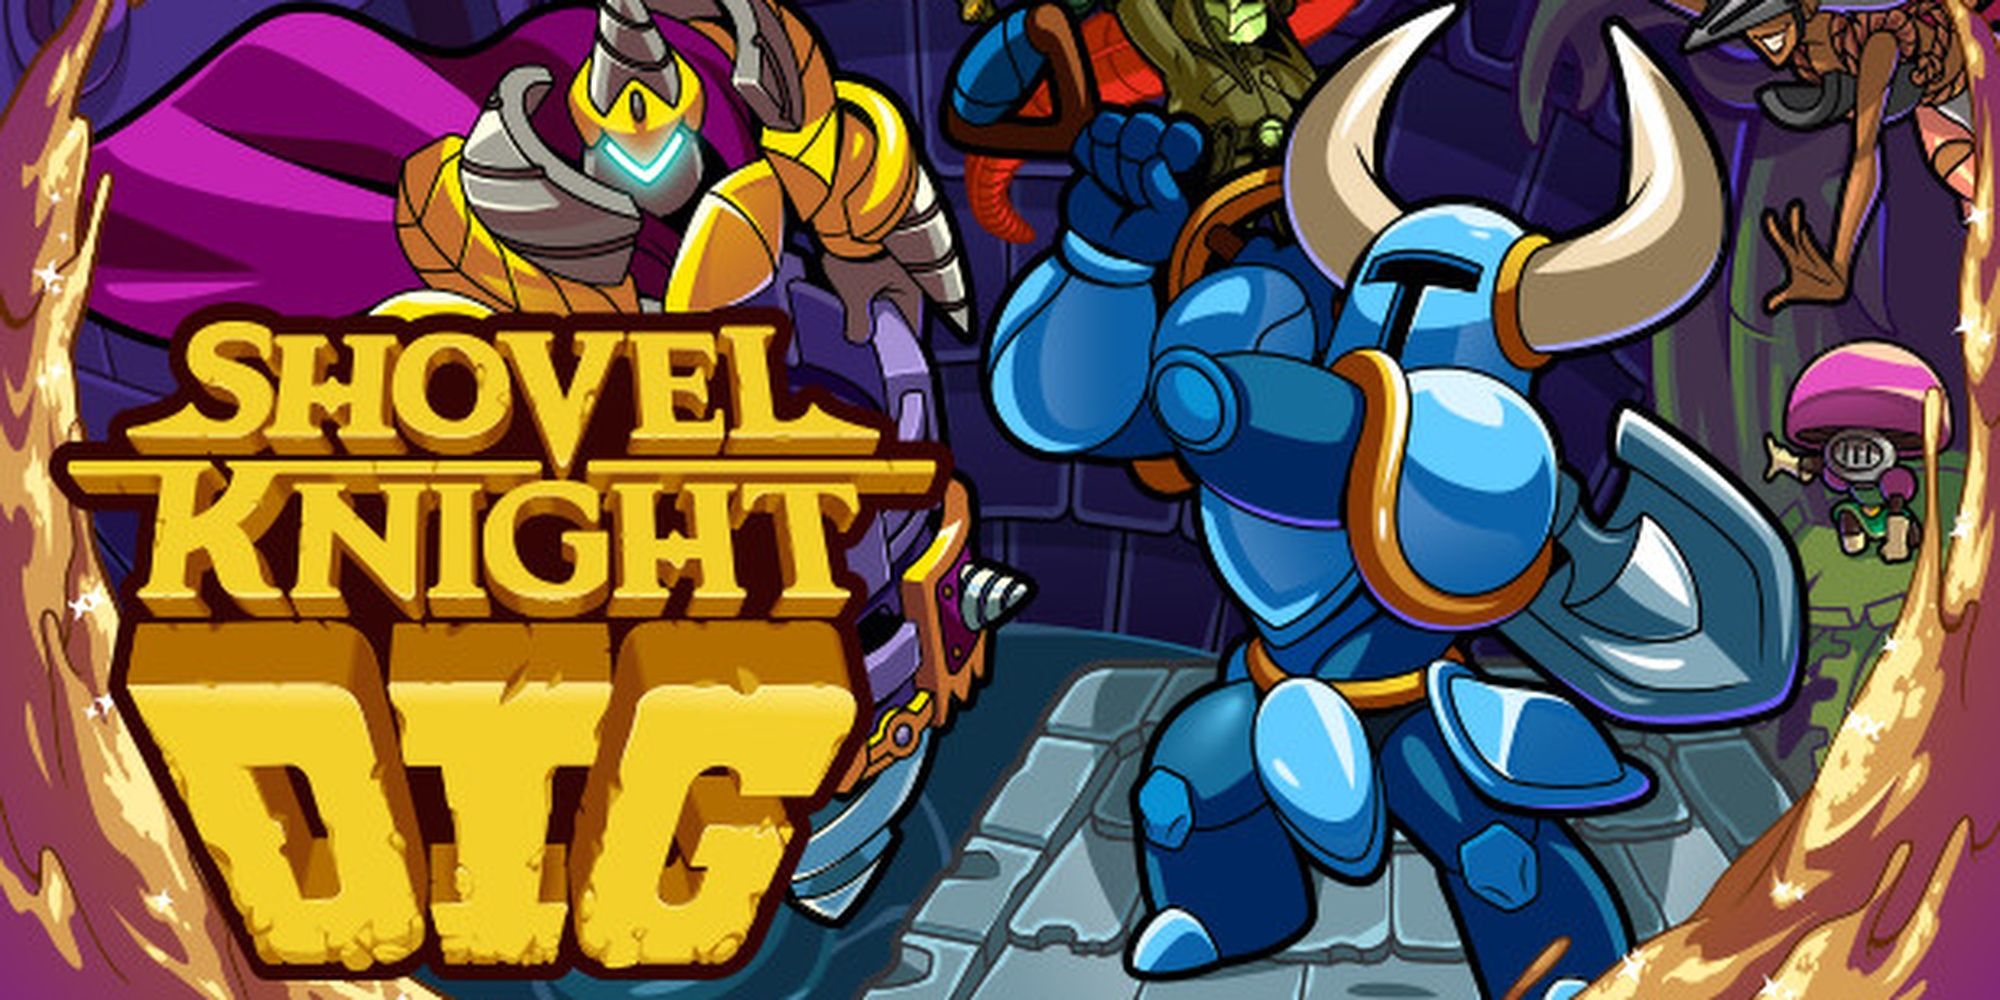 The title page from Shovel Knight Dig